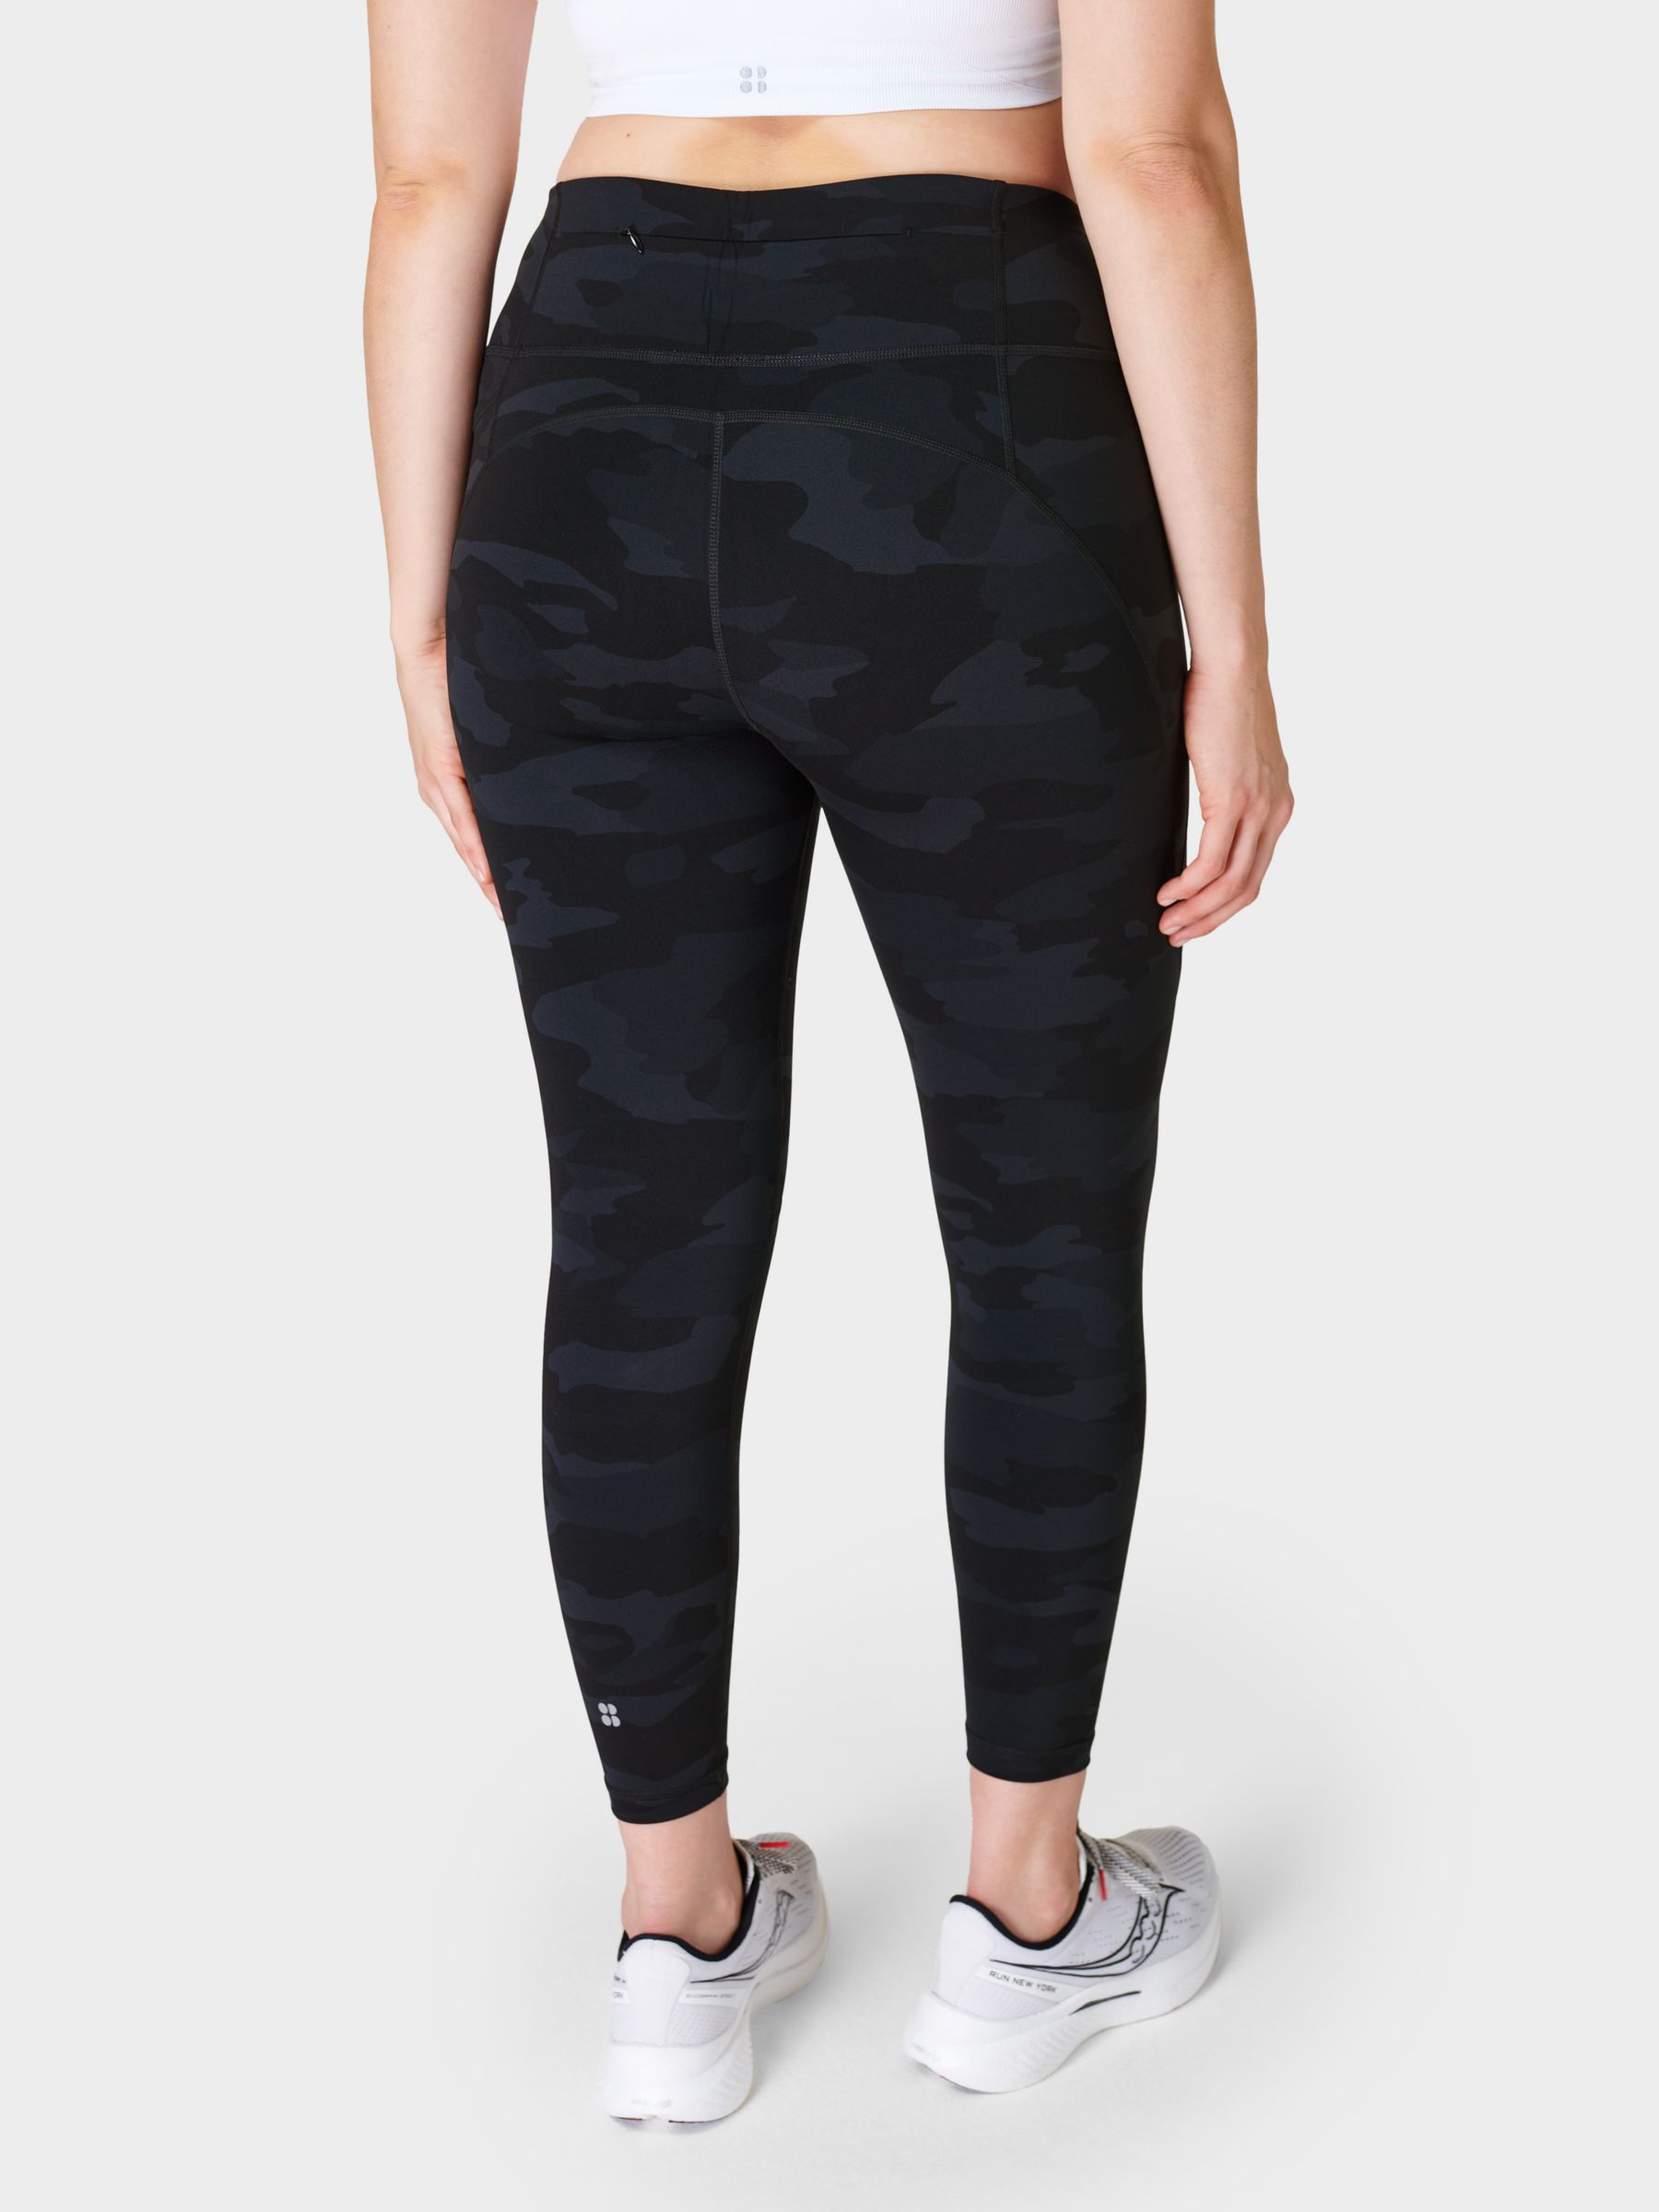 Anyone have the Incognito Camo leggings that can share review/pics